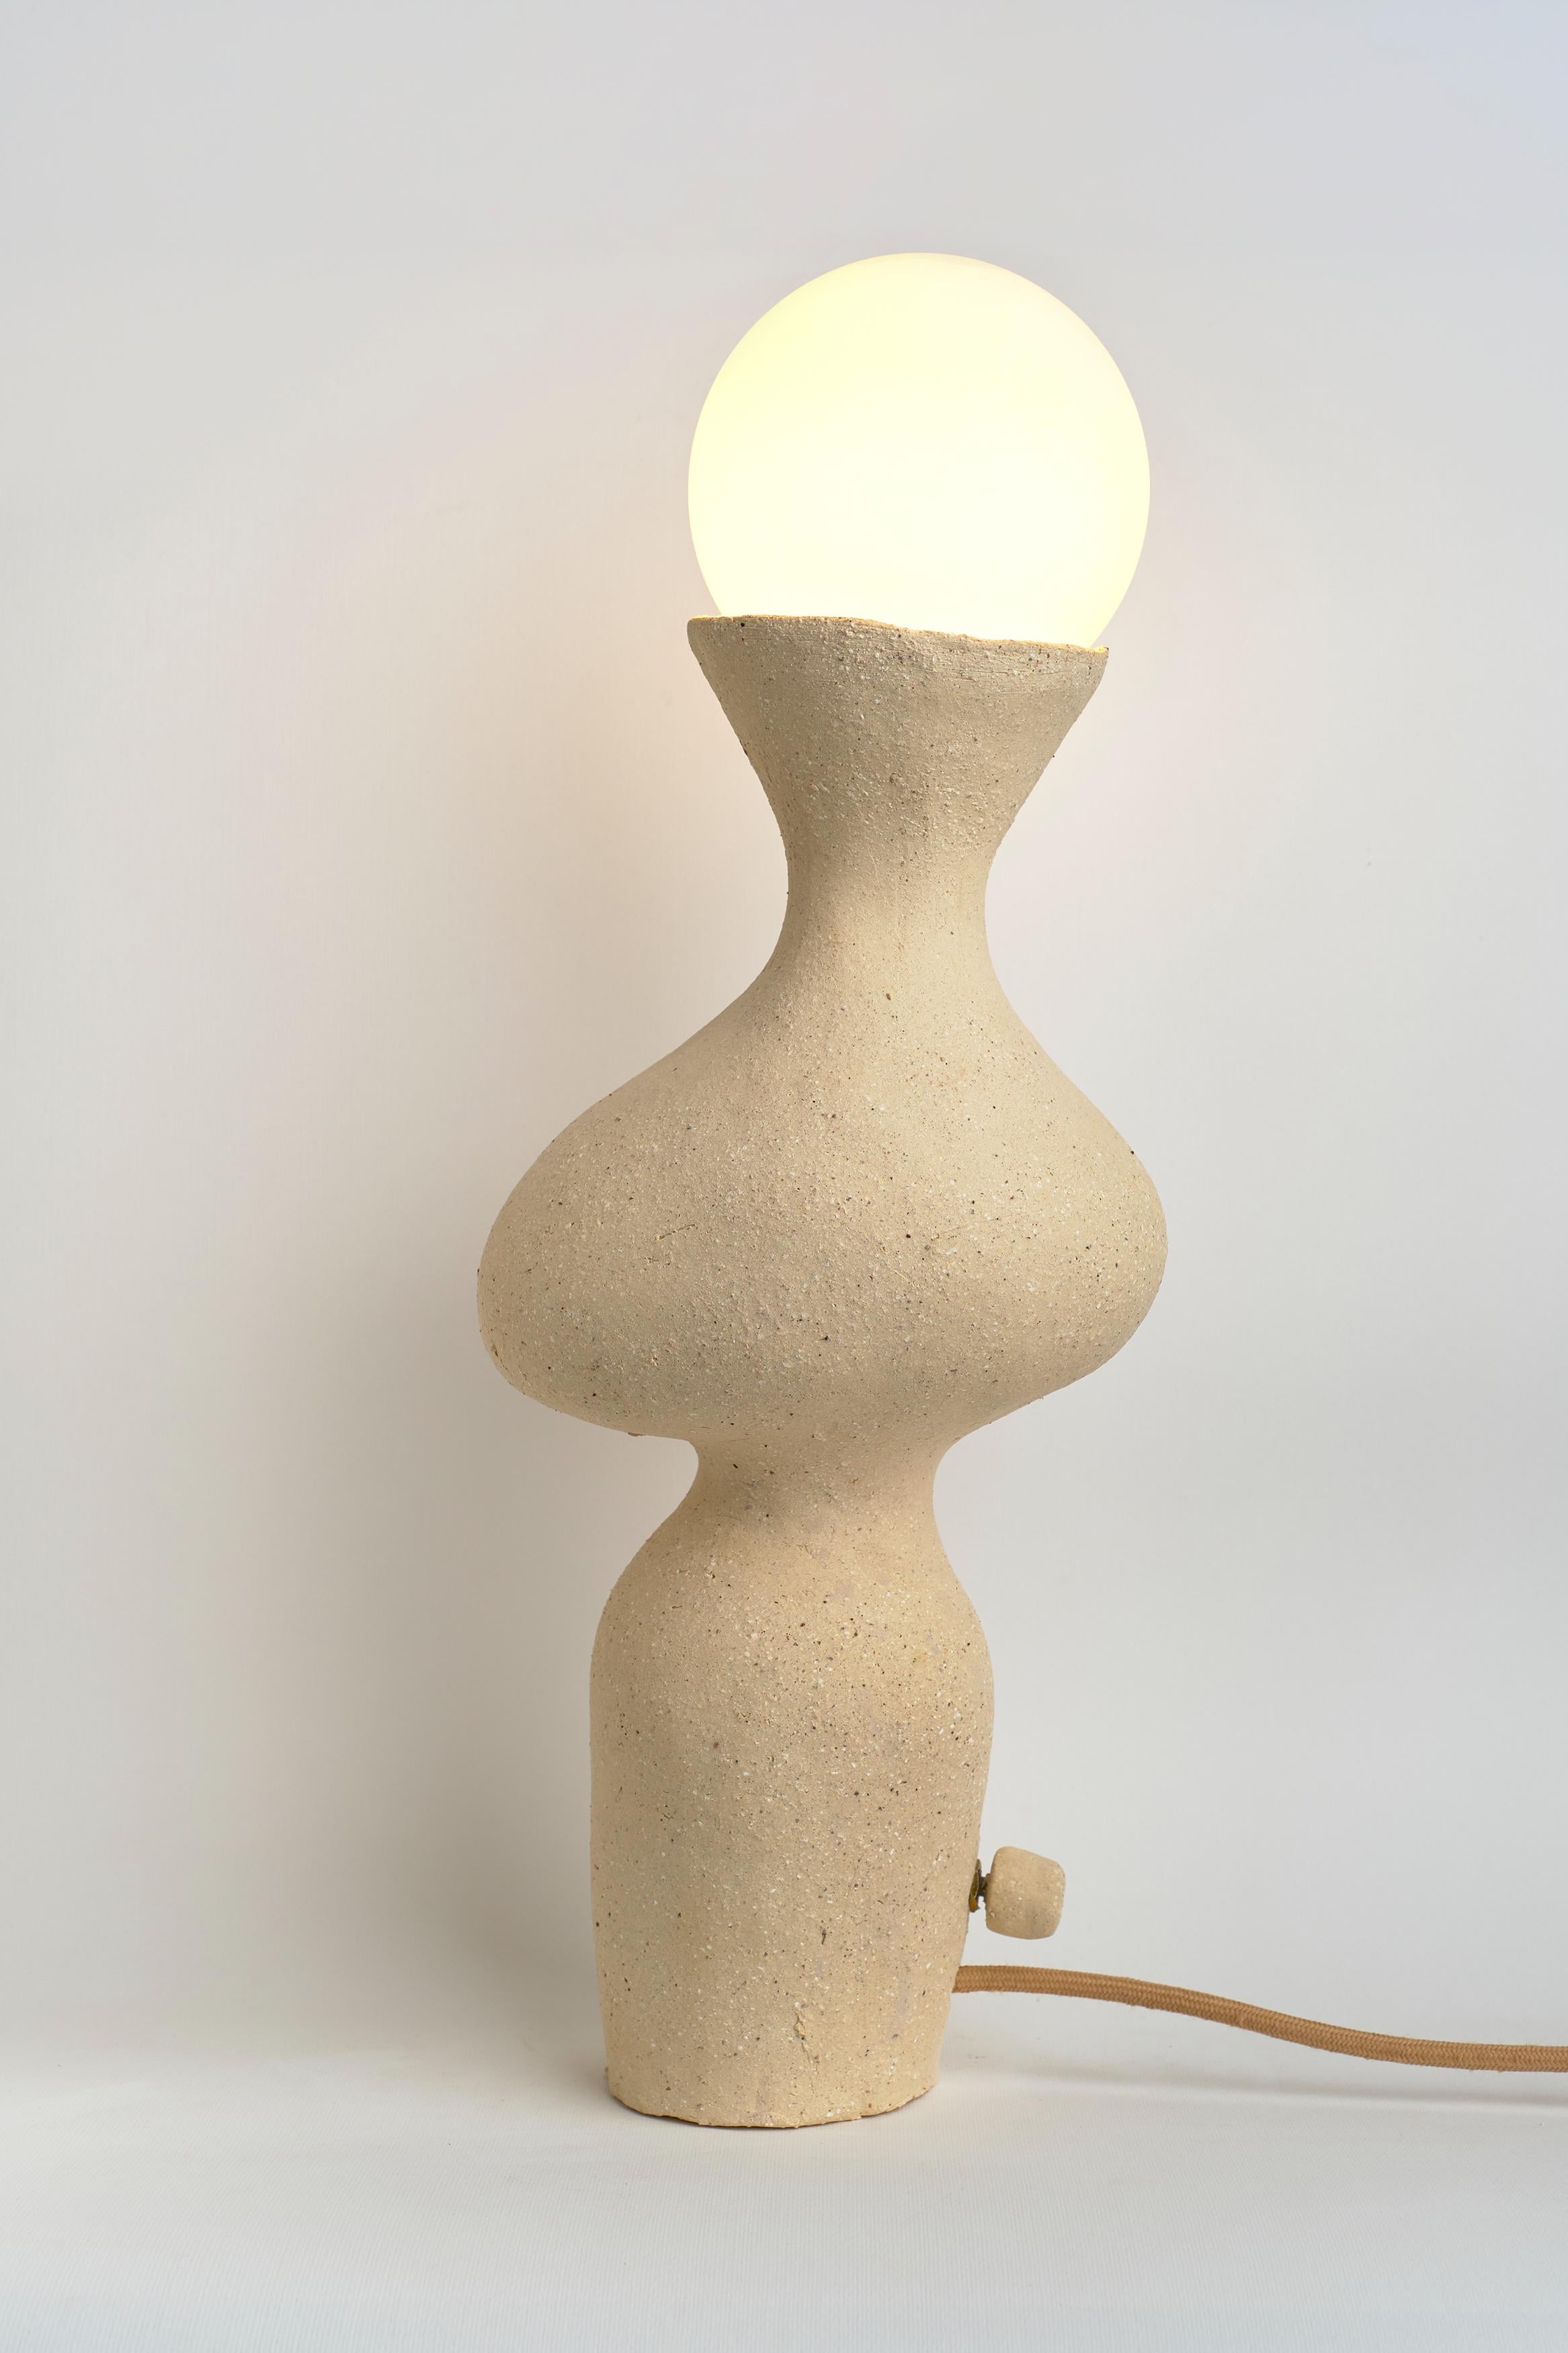 Silueta I Table Lamp by Camila Apaez
Unique
Materials: Ceramic, Glass
Dimensions: W 14 x D 19 x H 49 cm

Ila Ceramica emerged from a process of inner inquiry where ceramics became a space for presence, silence, touch and patience. Camila discovered